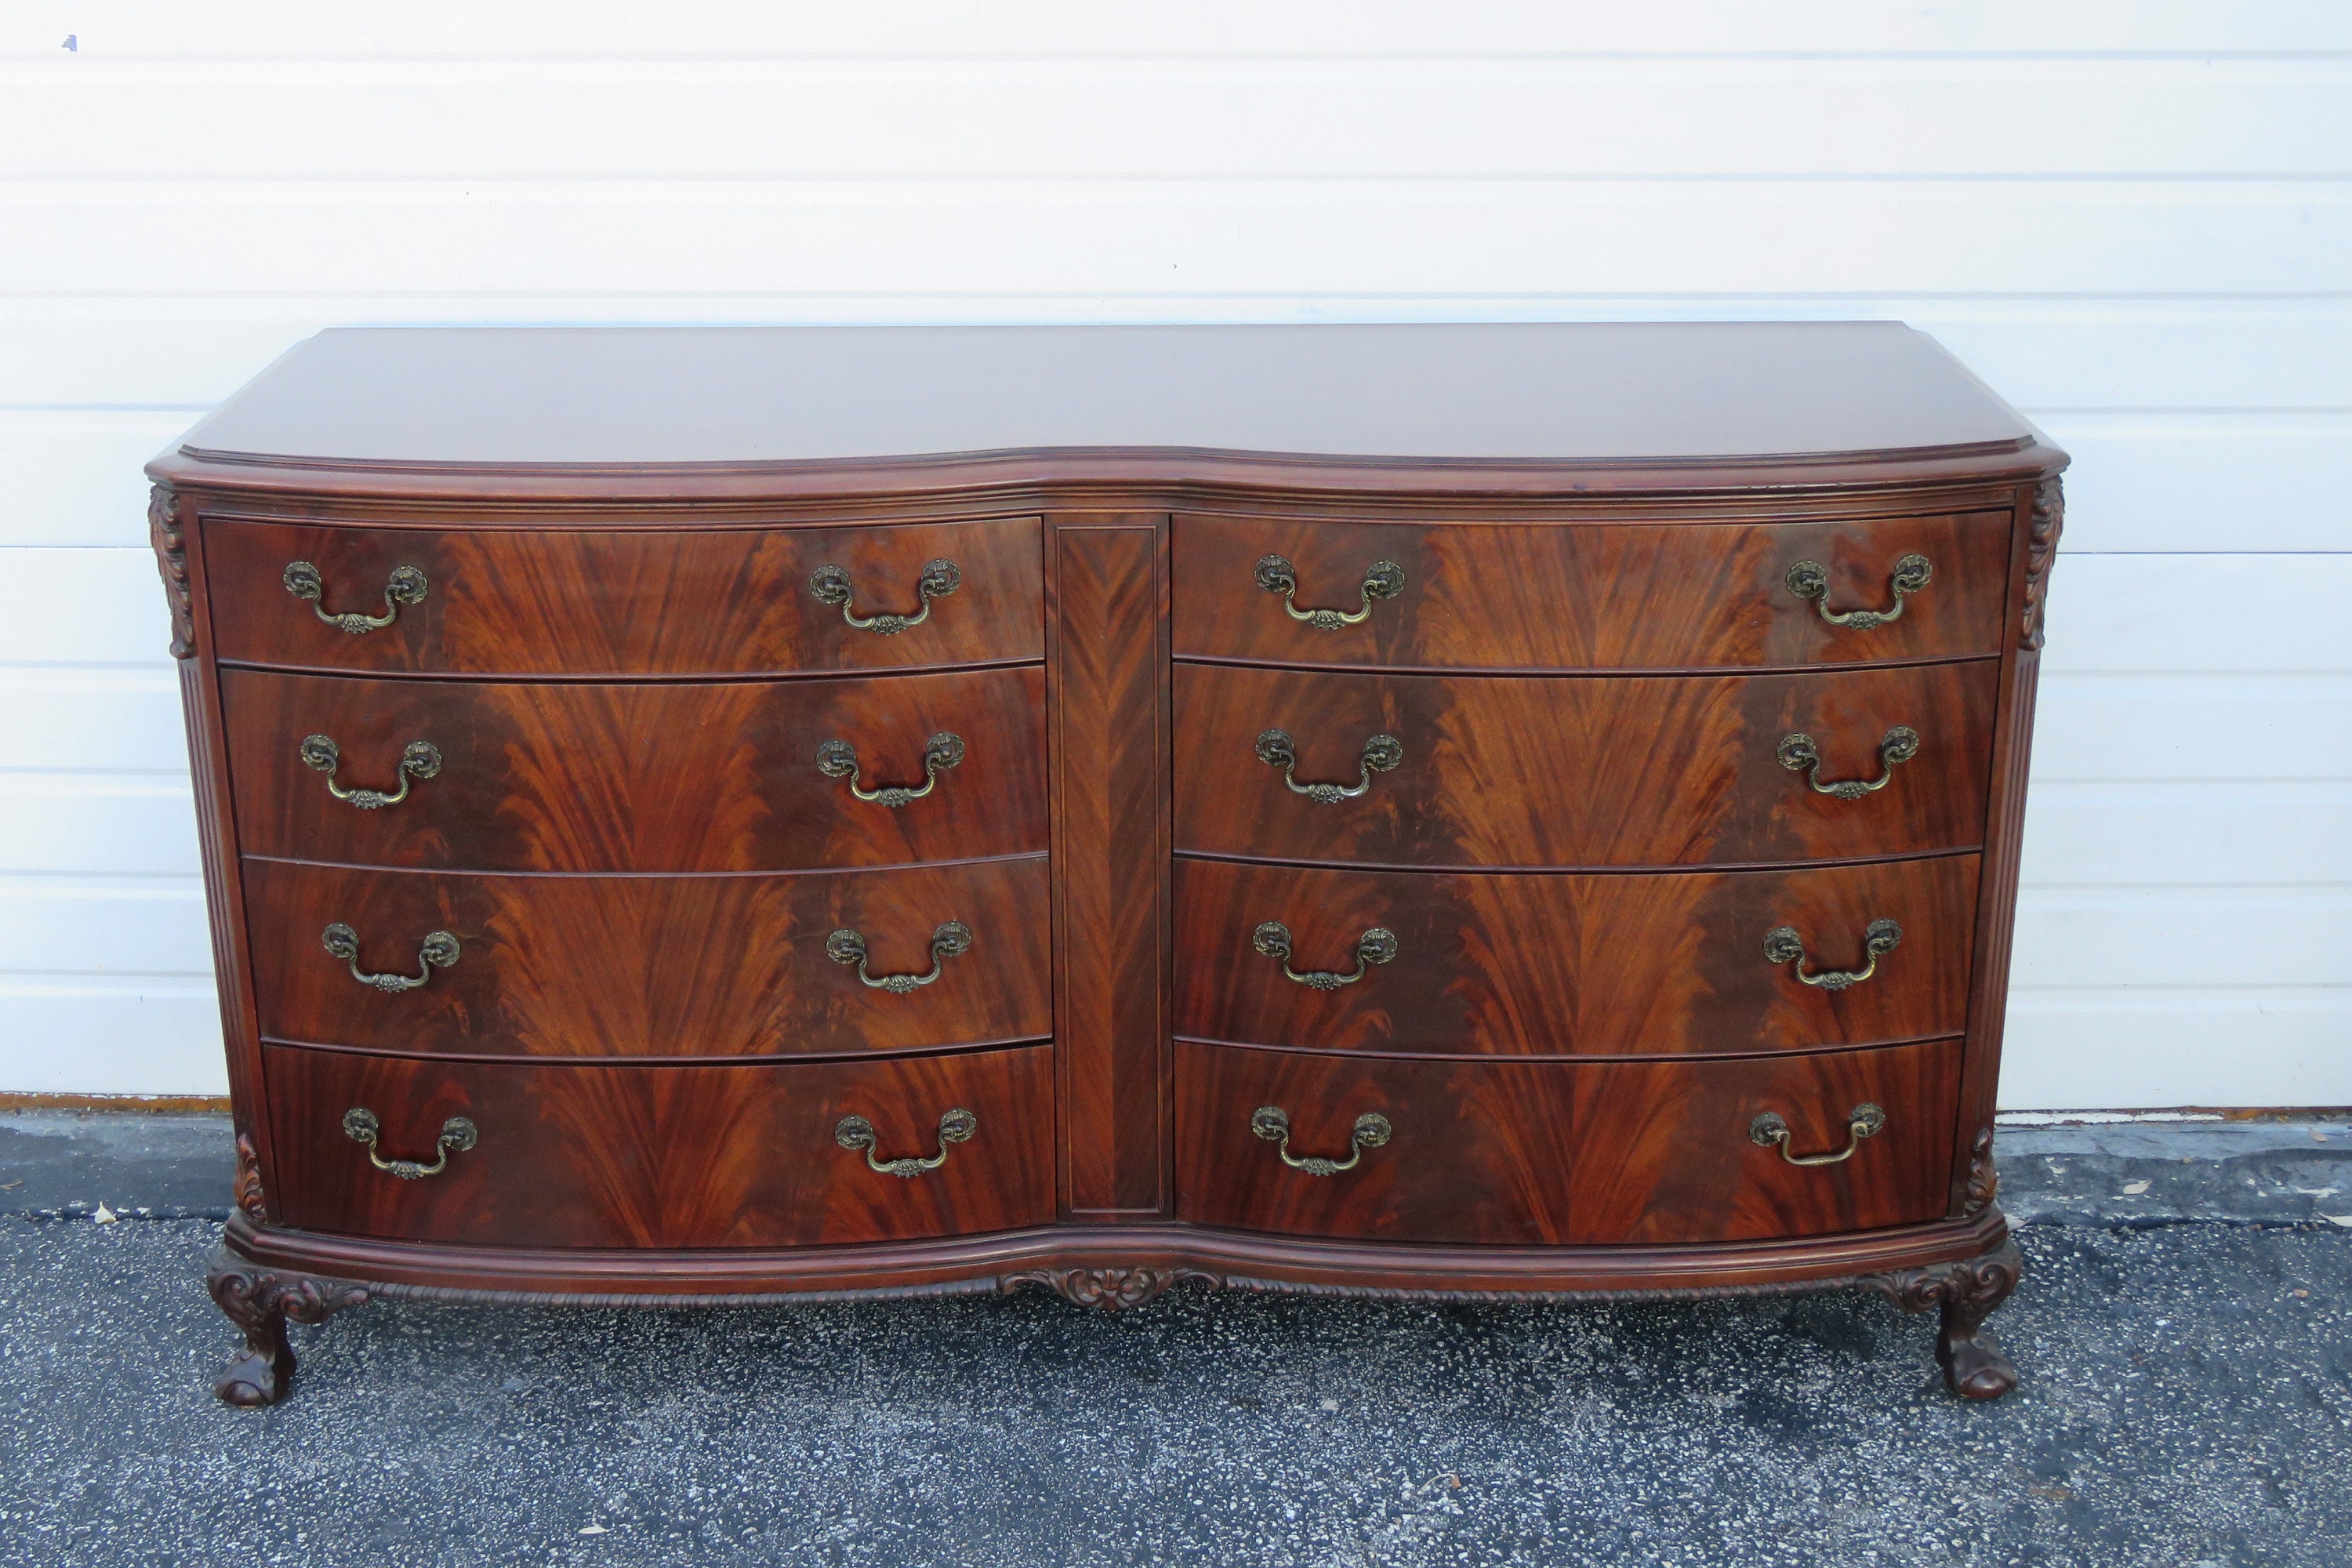 SOLD Emerald Green Tall Dresser Chest of Drawers Vintage Antique Mahogany  Bow Front With Gold Handles San Francisco CA -  Denmark